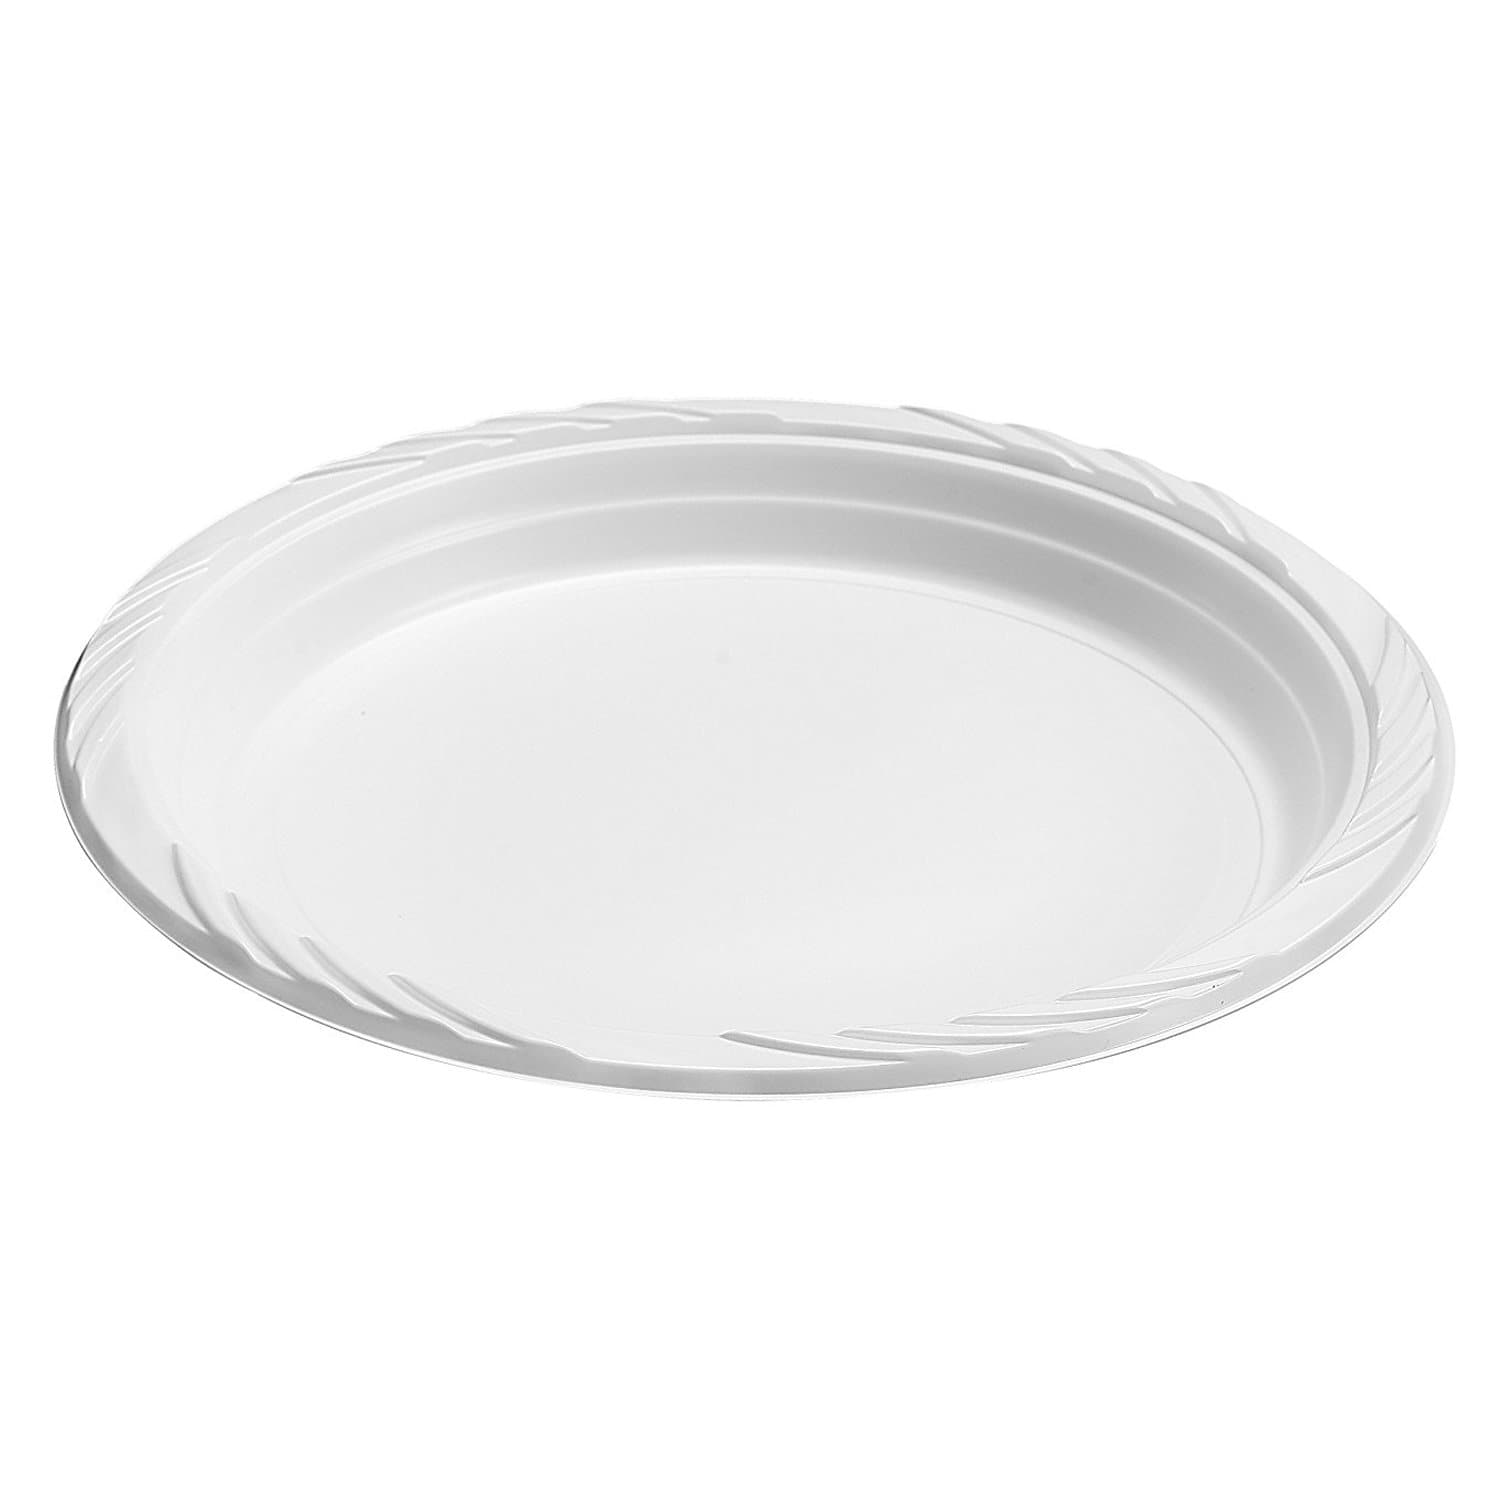 7" Disposable Lightweight White Plastic plates Good to use in Microwave Plastic Plates Blue Sky   